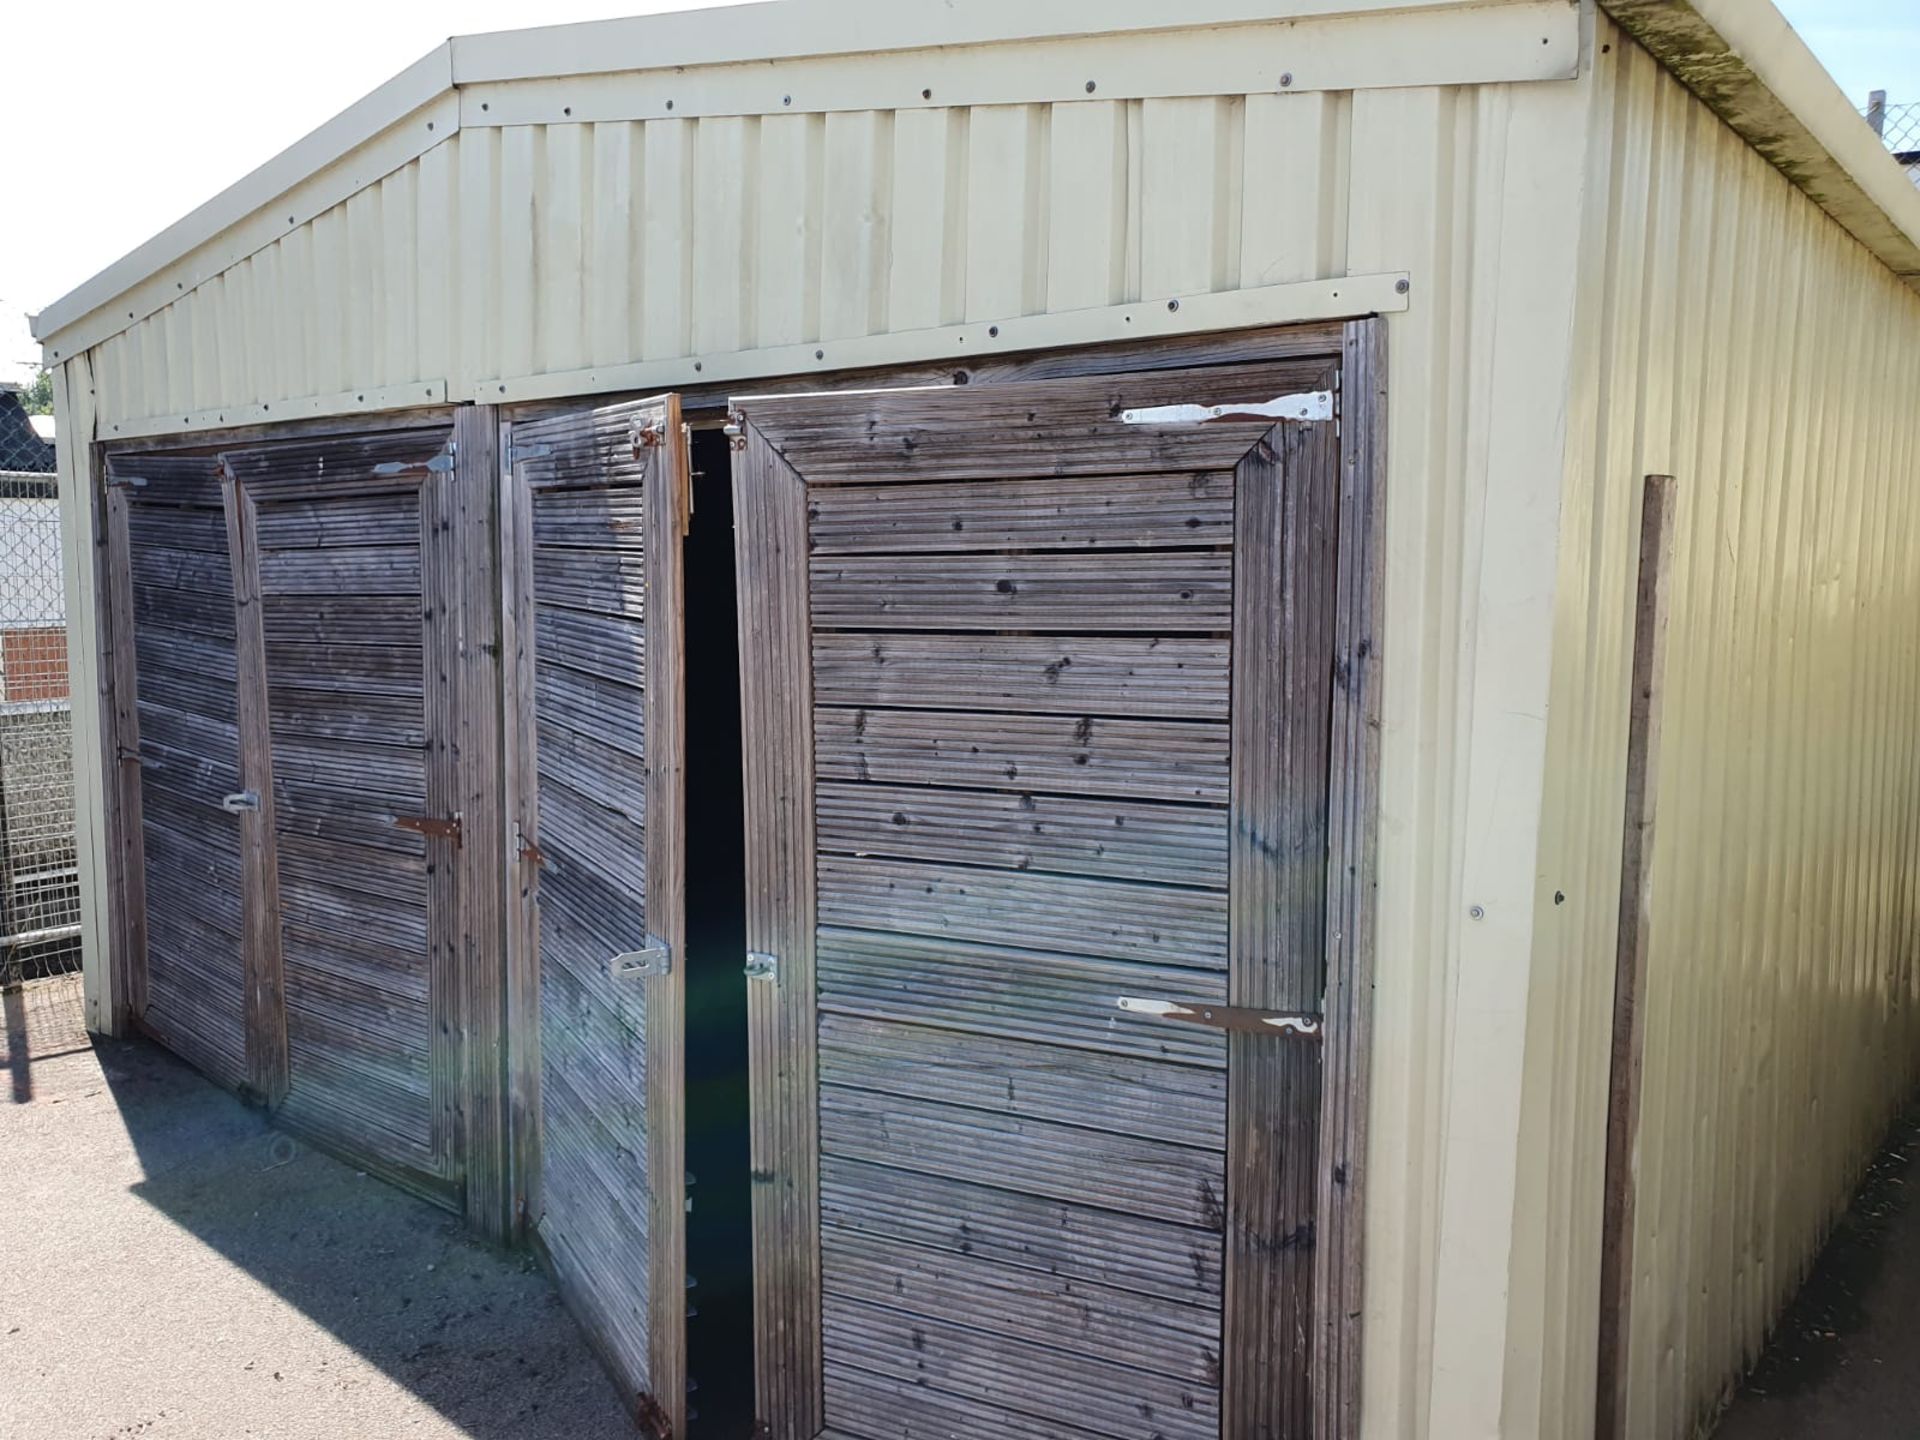 1 x Large Steel Storage Shed Container With Four Wooden Folding Doors - Approx Dimensions 5M x 5M - Image 17 of 18